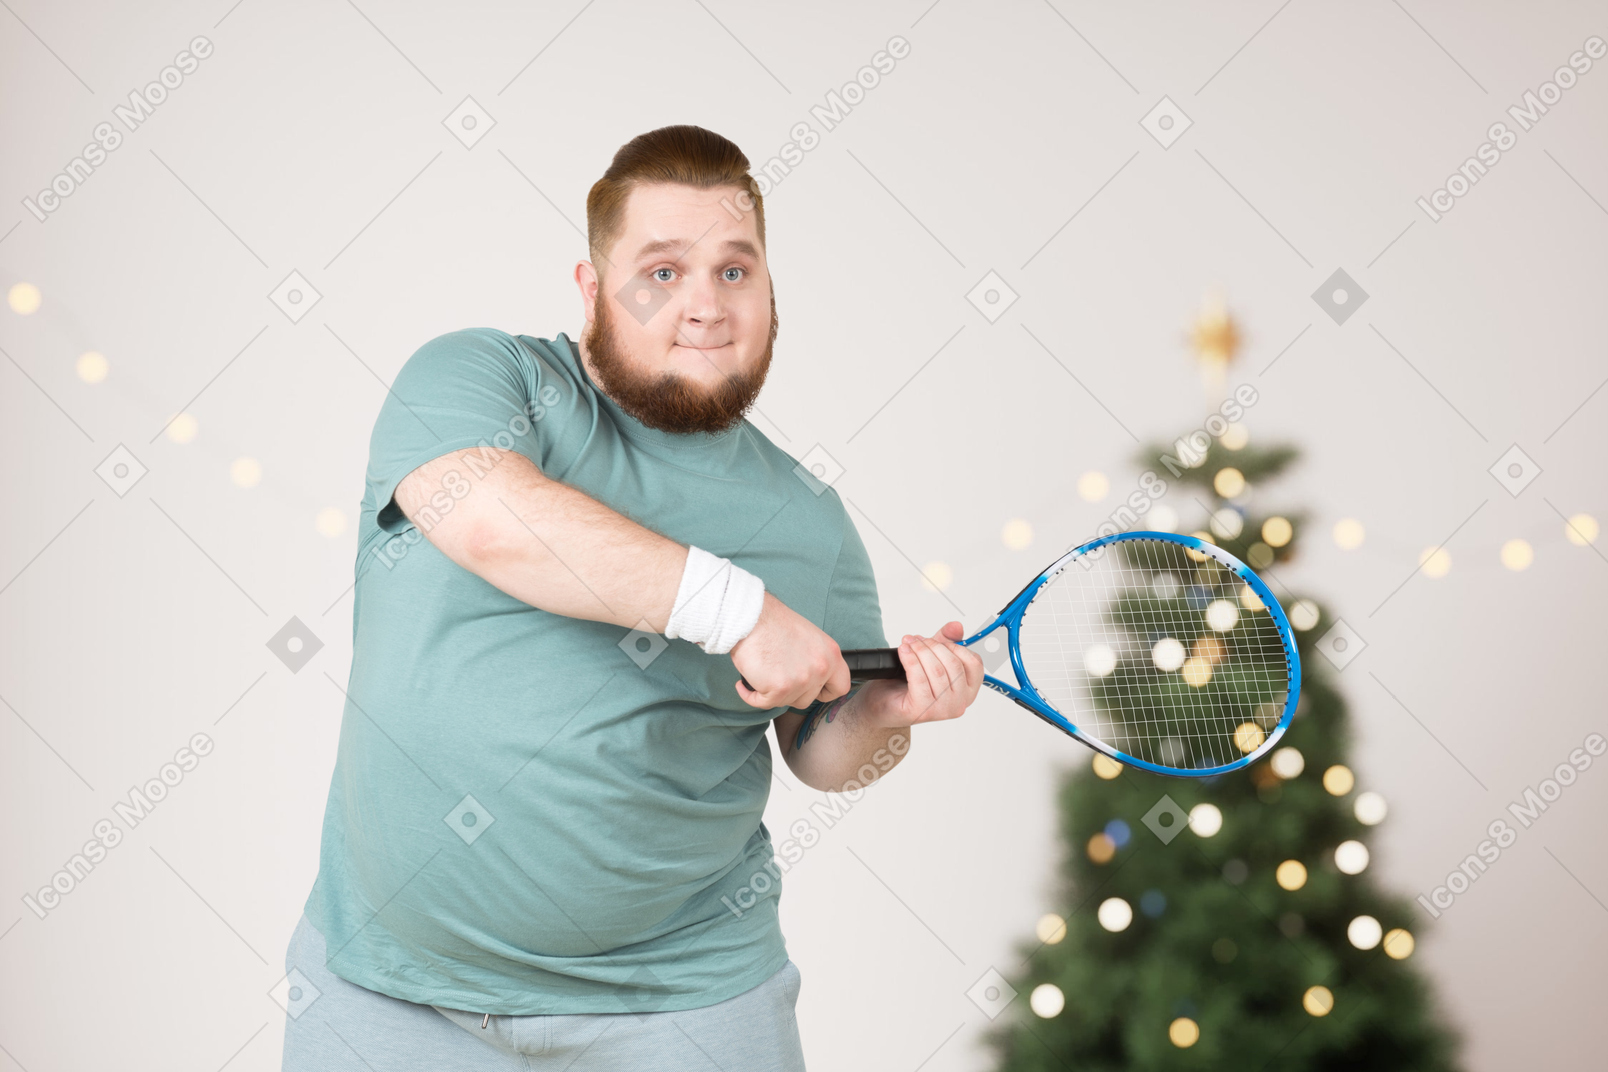 Fat guy is happy to get a tennis rocket for christmas